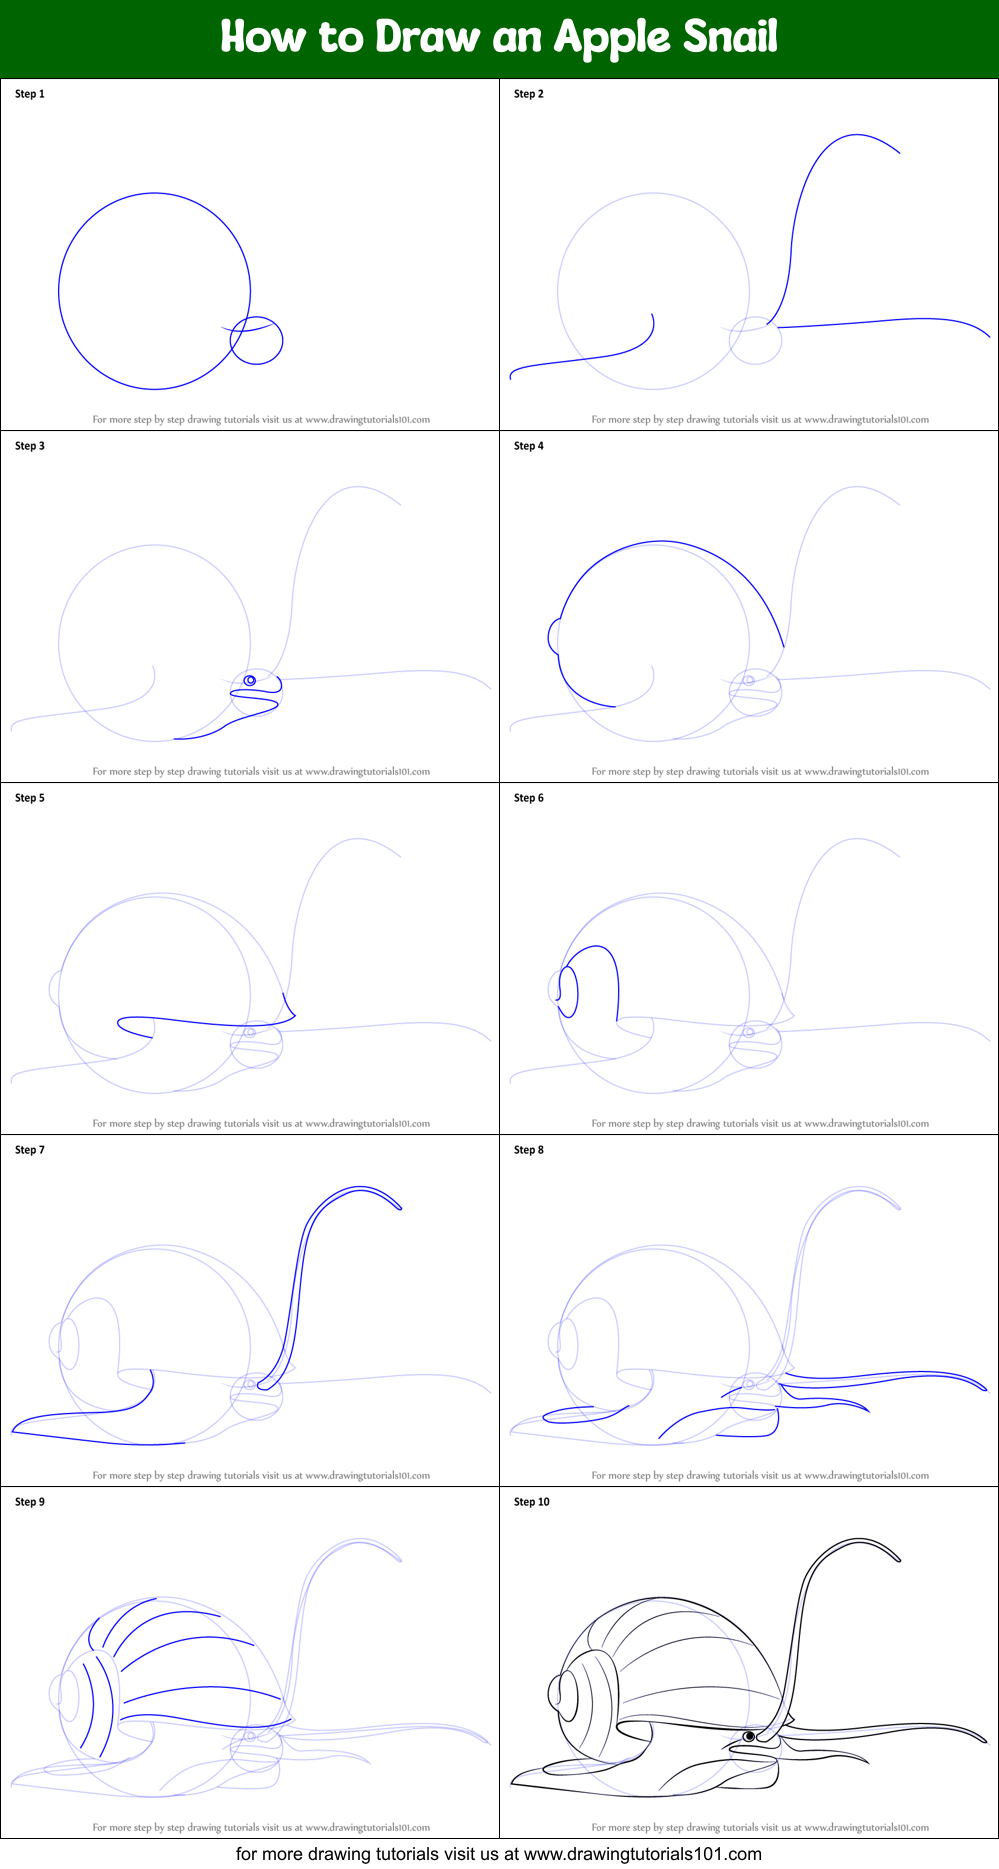 How to Draw an Apple Snail printable step by step drawing sheet